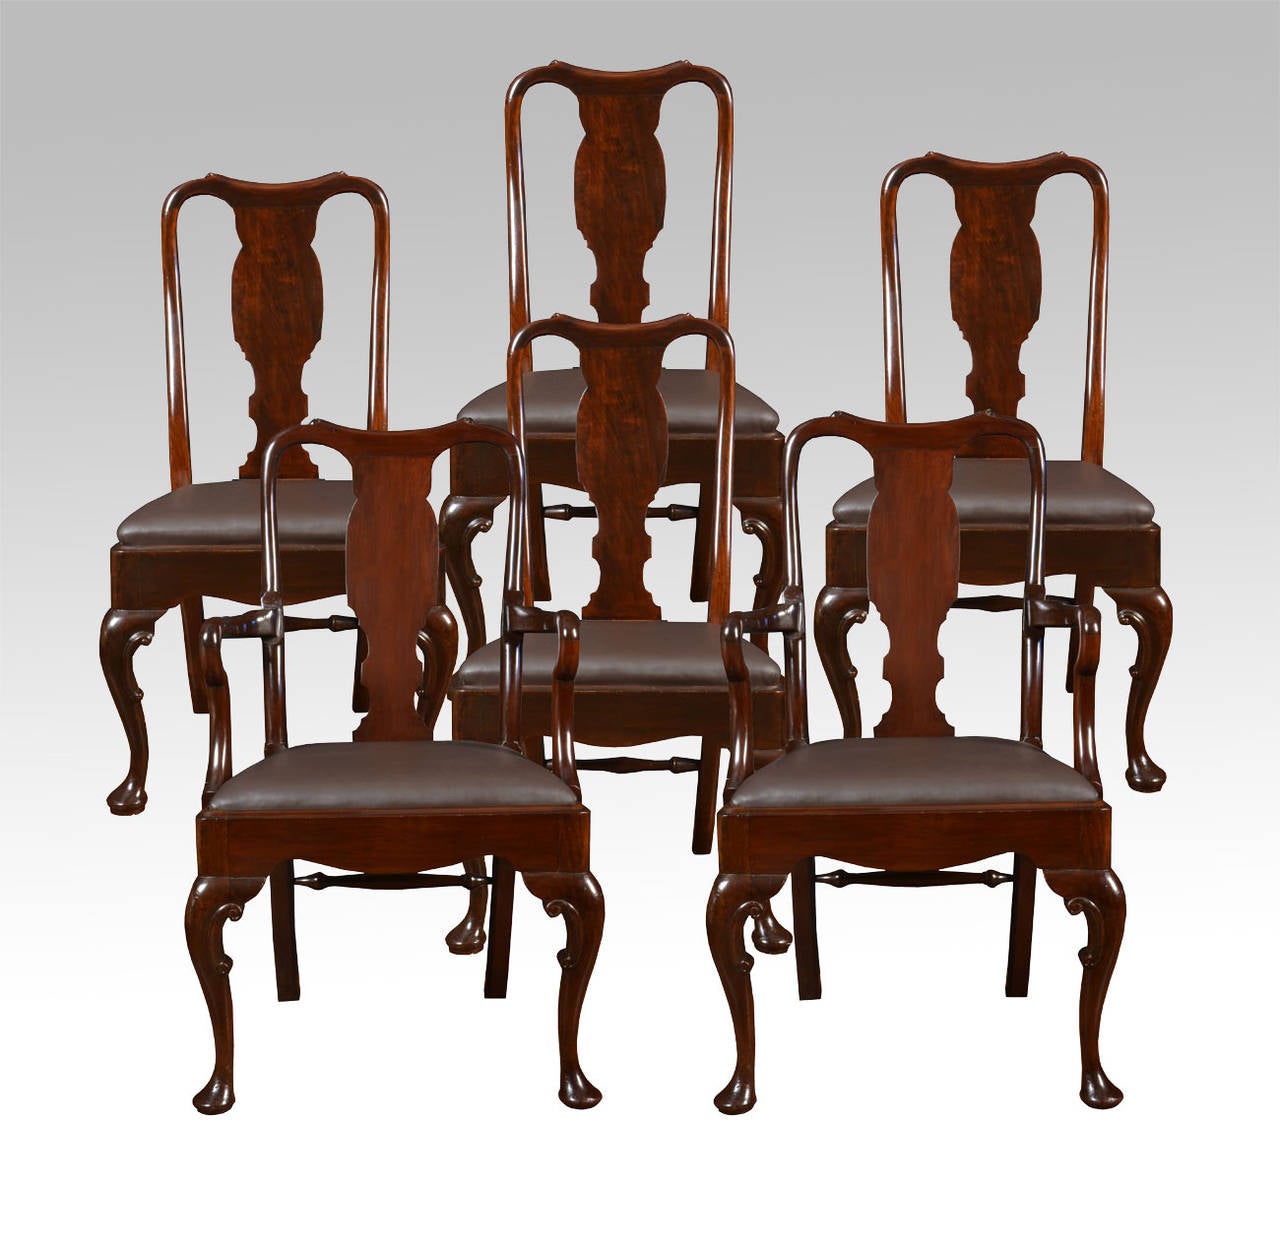 Set of six early 20th century Queen Anne style high back dining chairs, having vase shaped back splat, drop-in seat and standing on cabriole supports united by turned rear stretcher, two carvers and four chairs

Measures: Carvers

Height 43